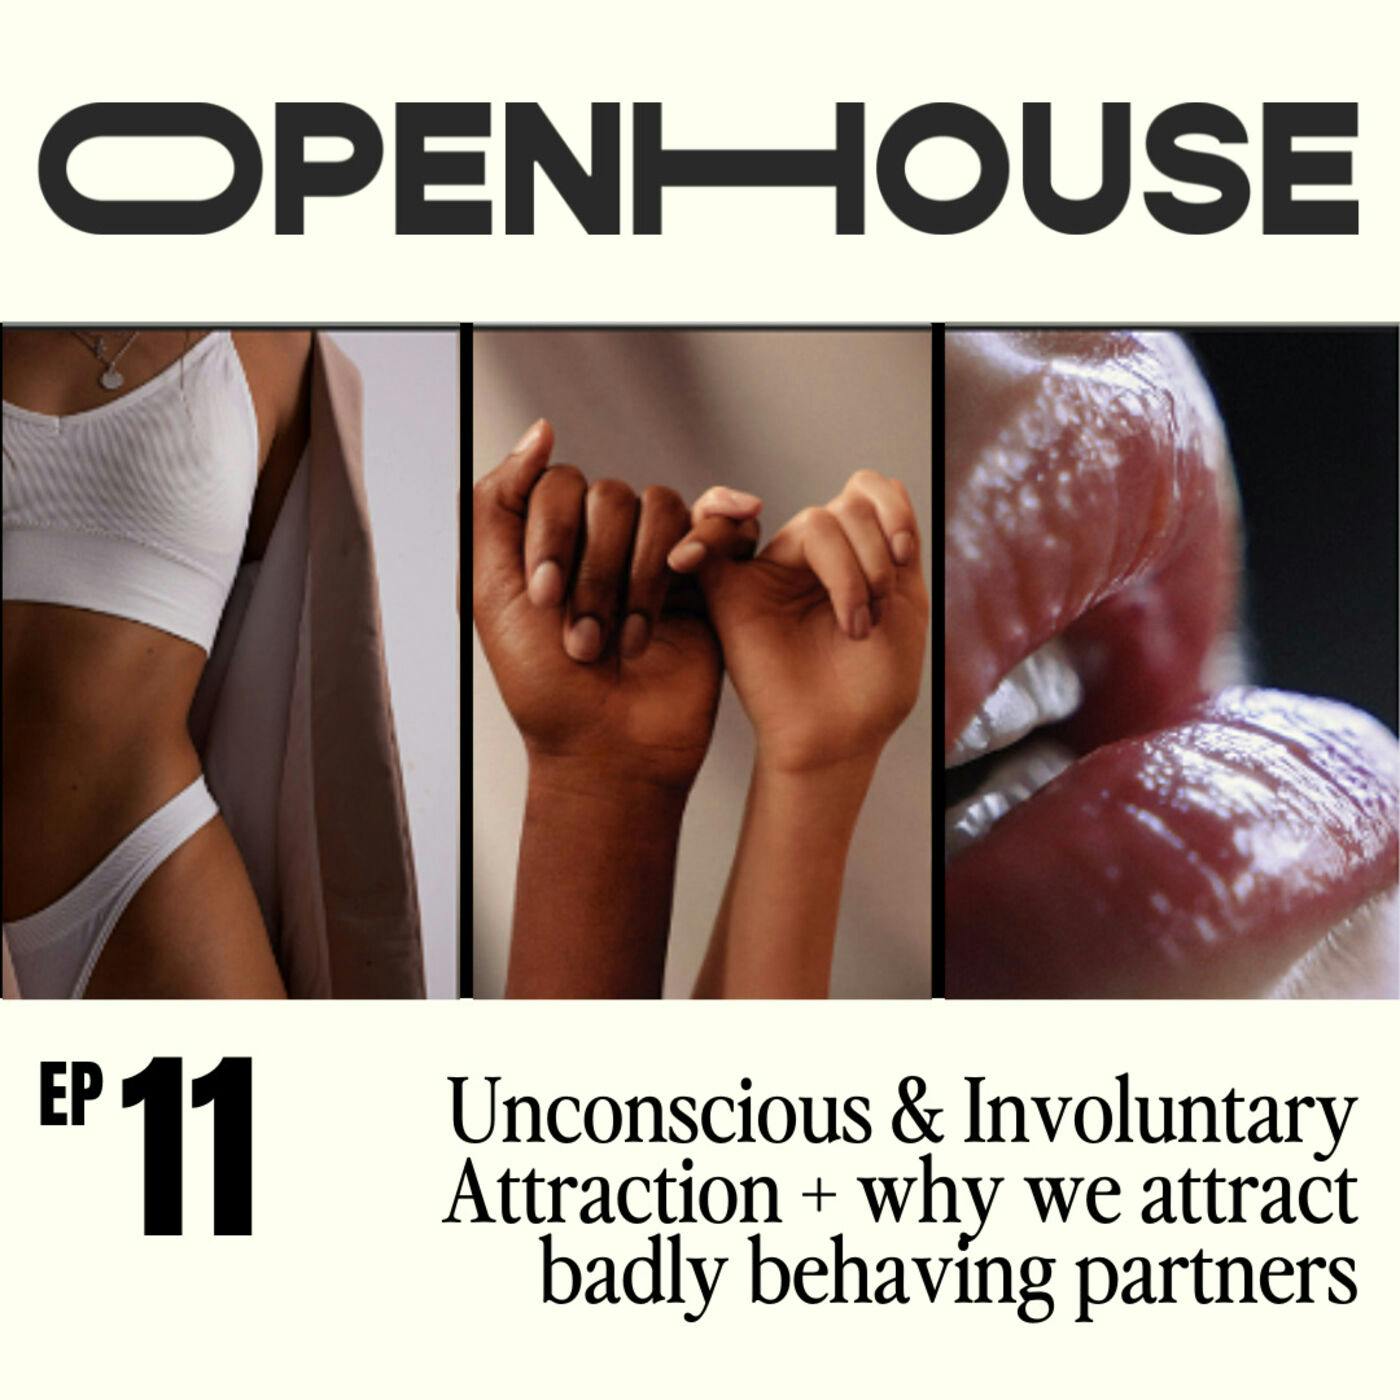 11 - UNCONSCIOUS ATTRACTION - Khloe Kardashian & Tristan Thompson - what is unconscious attraction, why do we attract badly behaving partners + how to rebuild a relationship